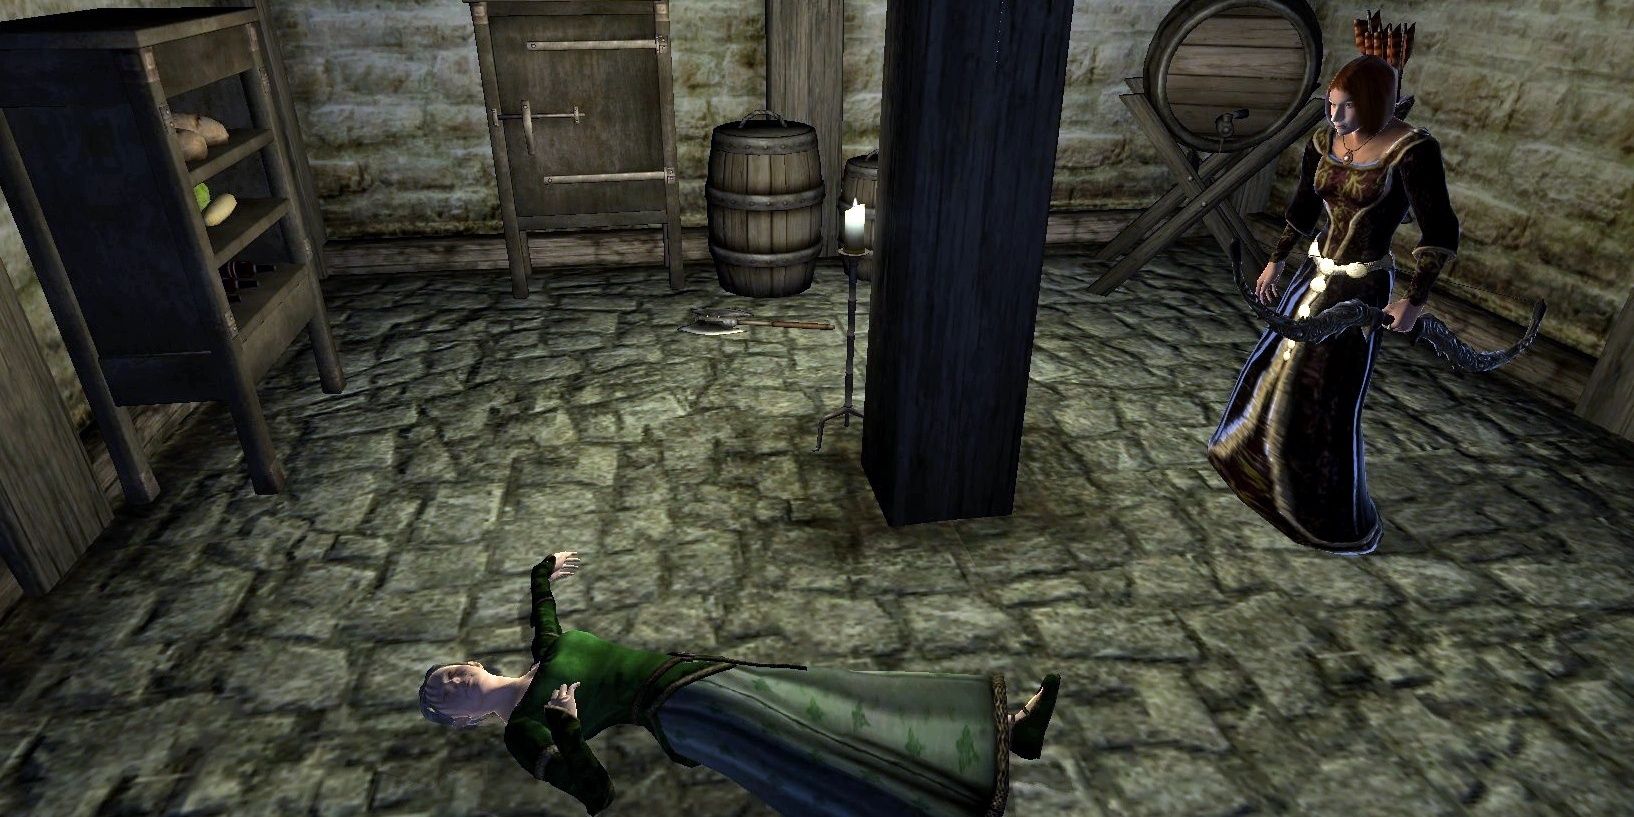 Whodunit Quest From Oblivion